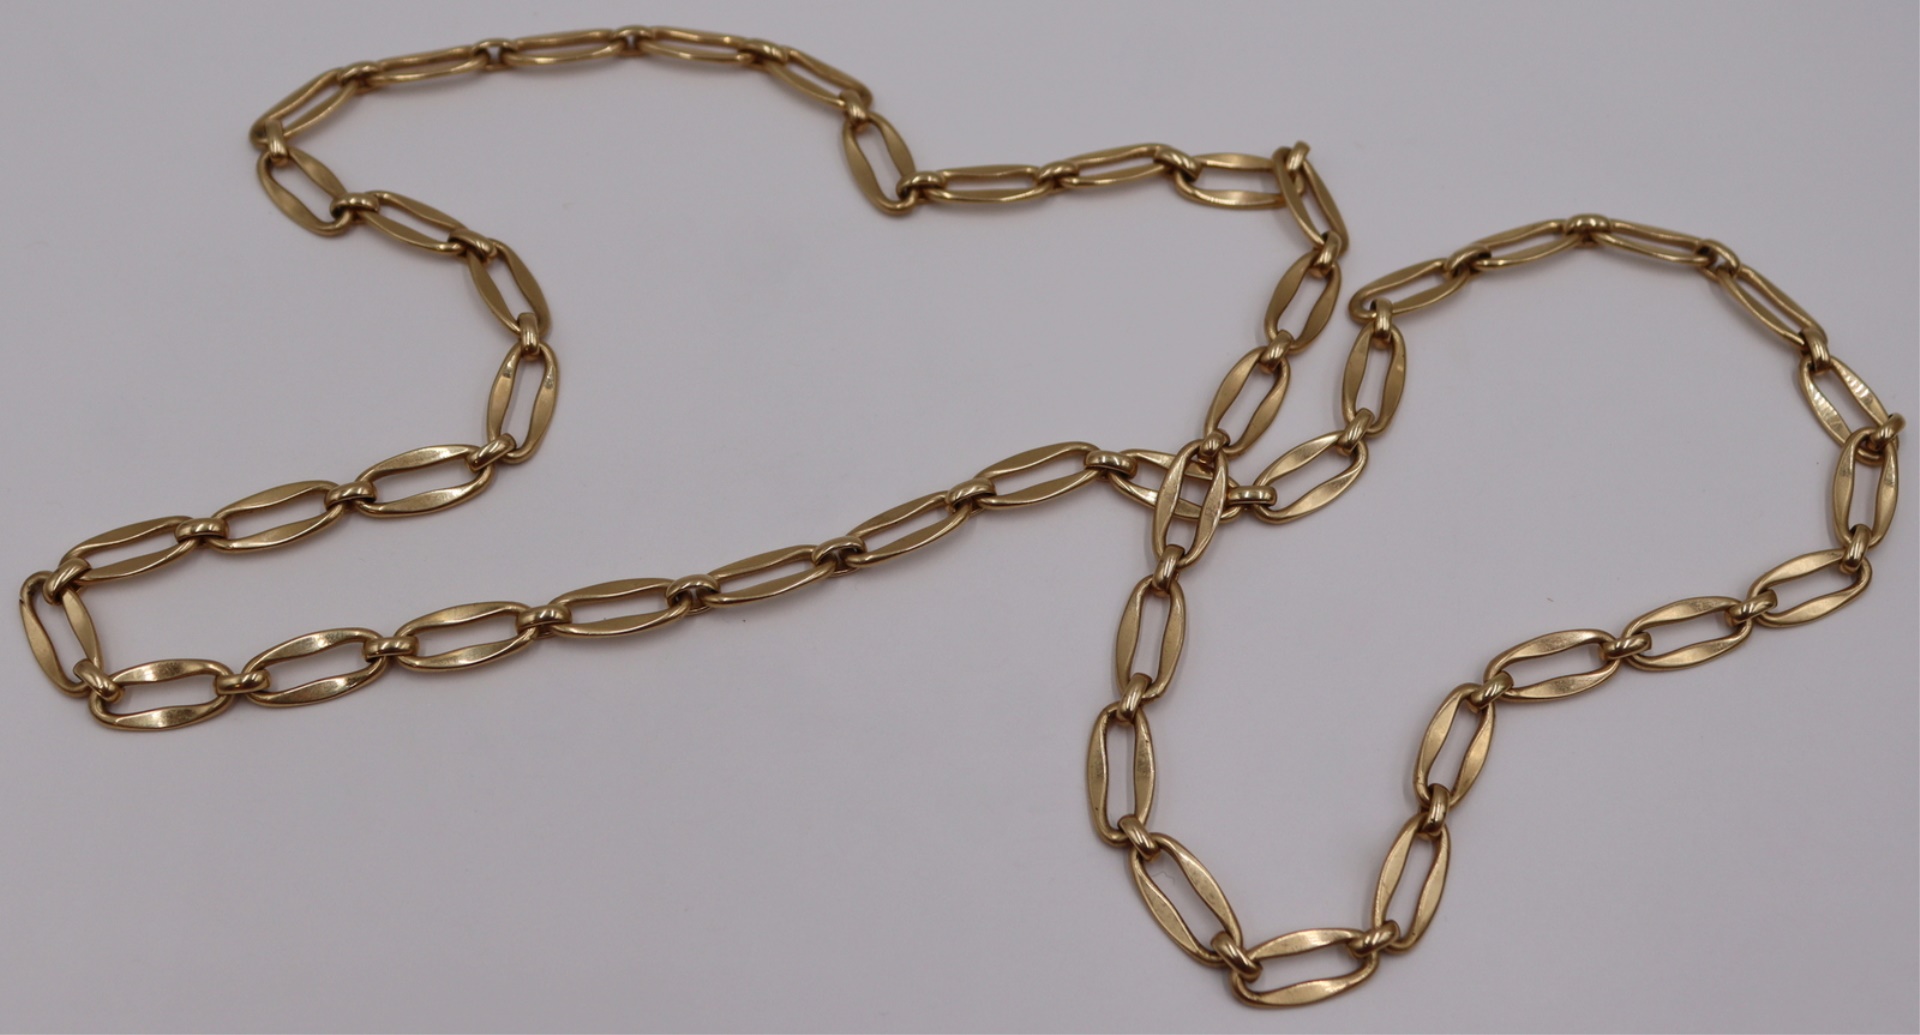 JEWELRY 14KT GOLD LINK NECKLACE  3be60a